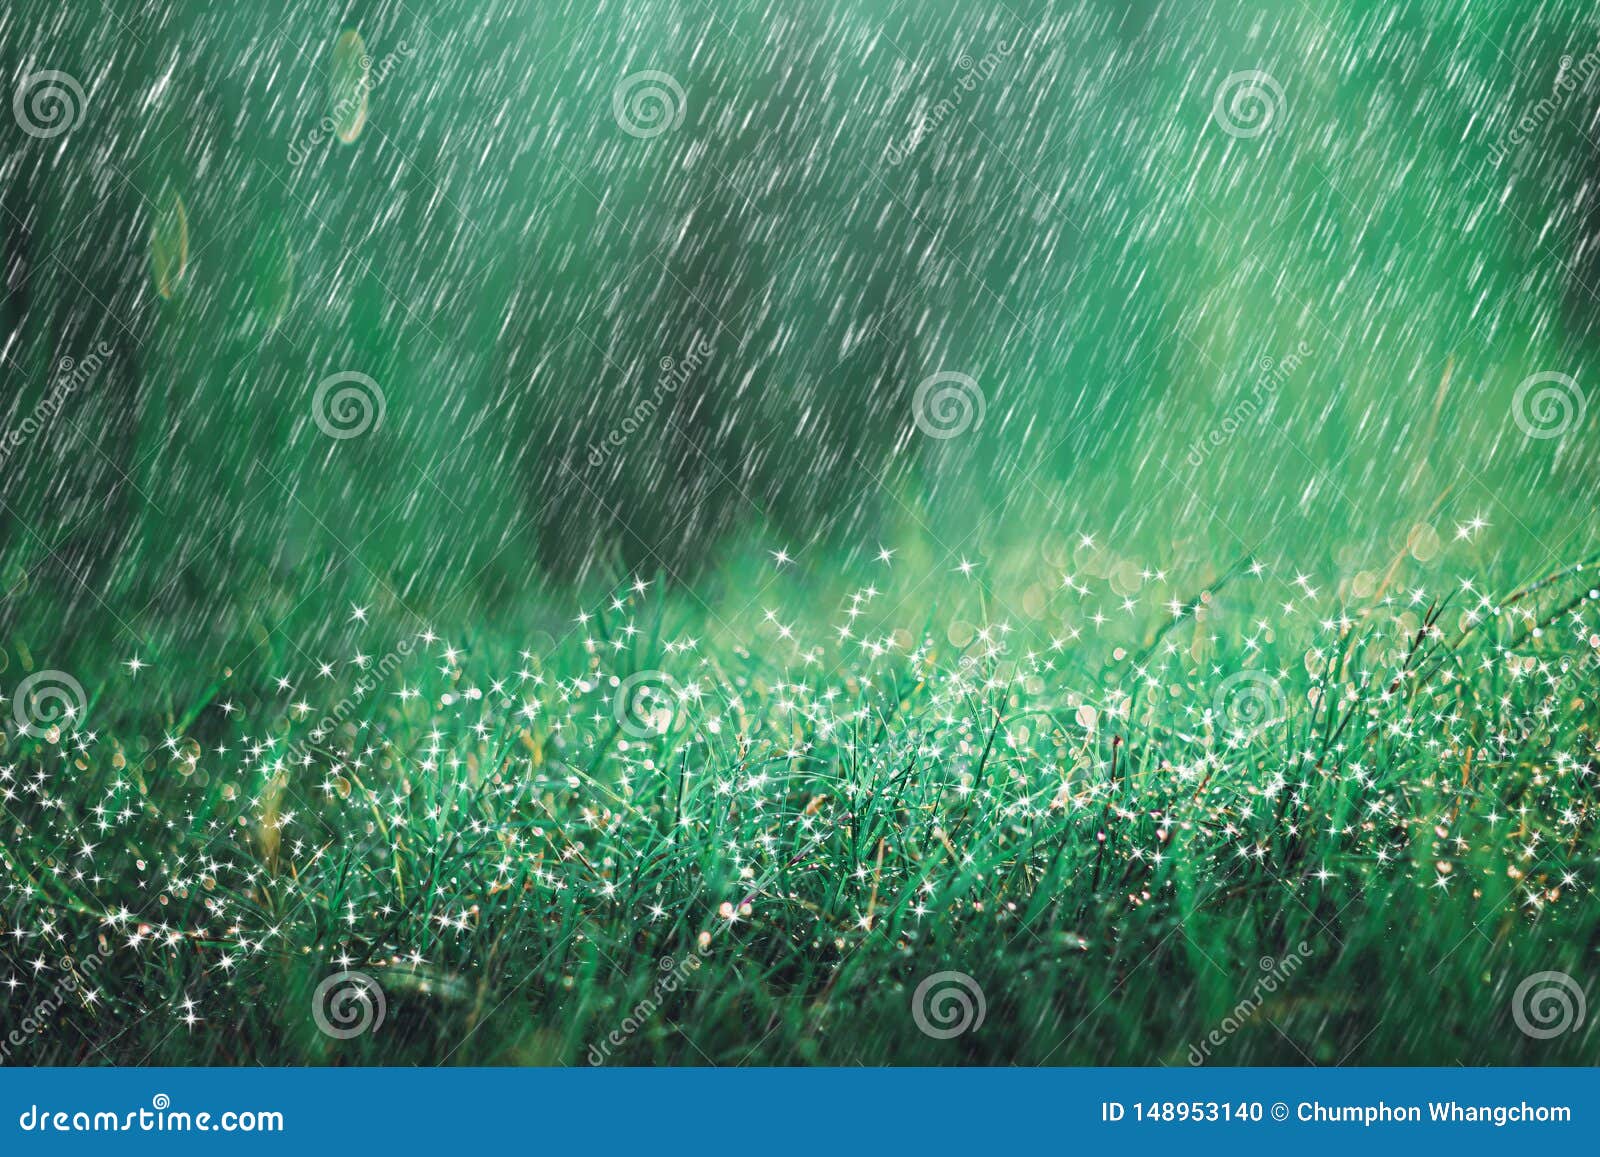 heavy rain shower on meadow background with sparkle and bokeh. raining in nature backdrop